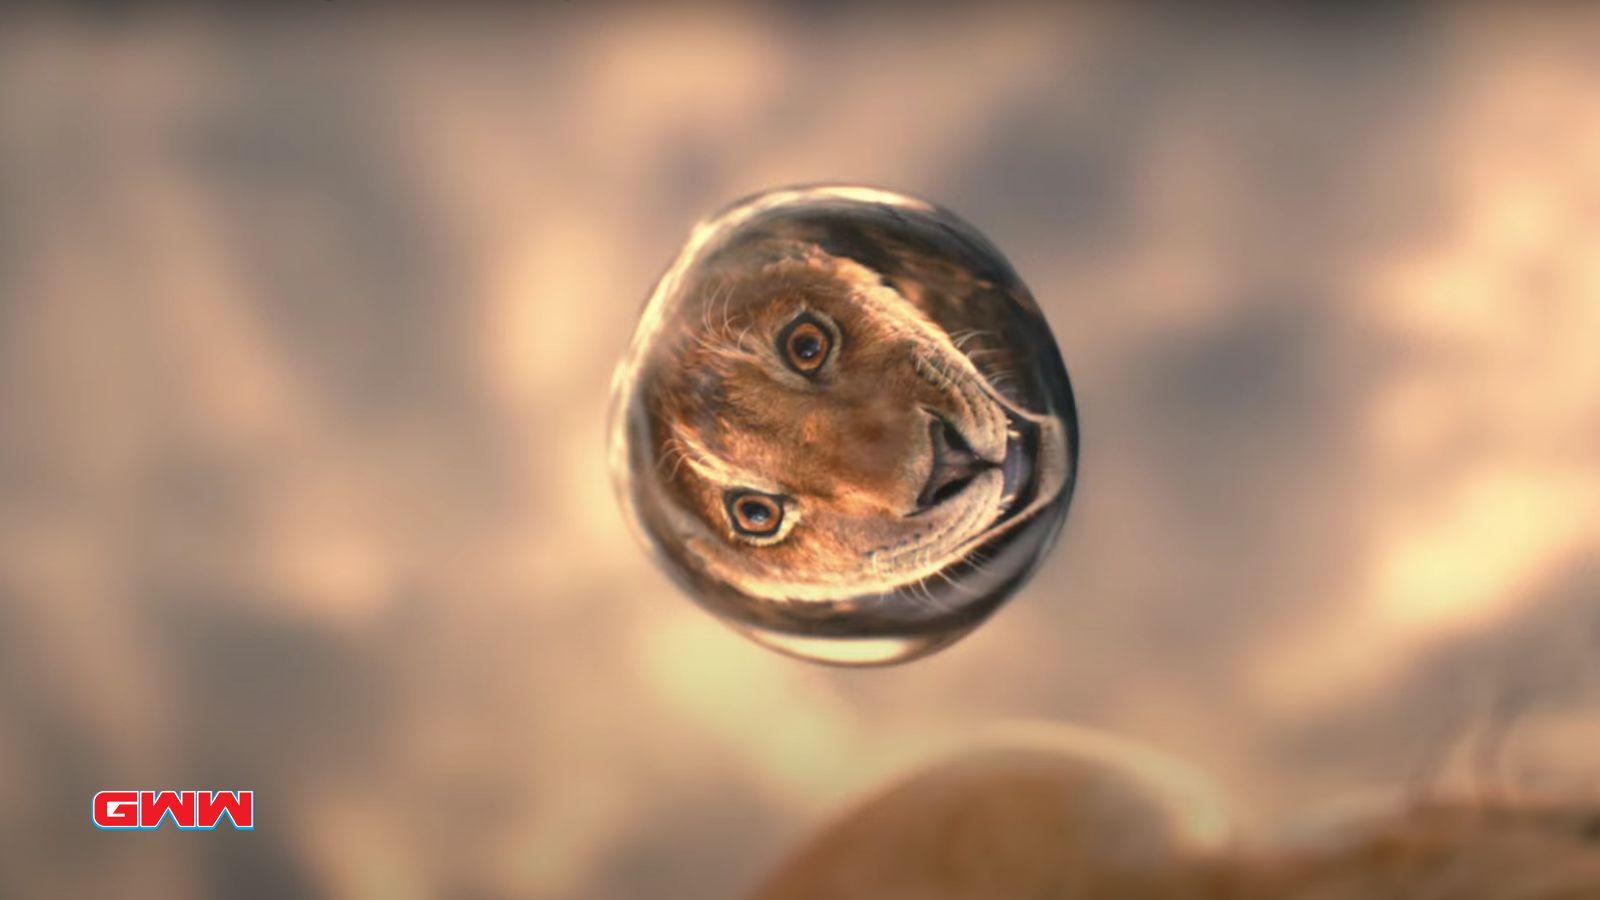 Mufasa's reflection on a drop of water in Mufasa: The Lion King movie